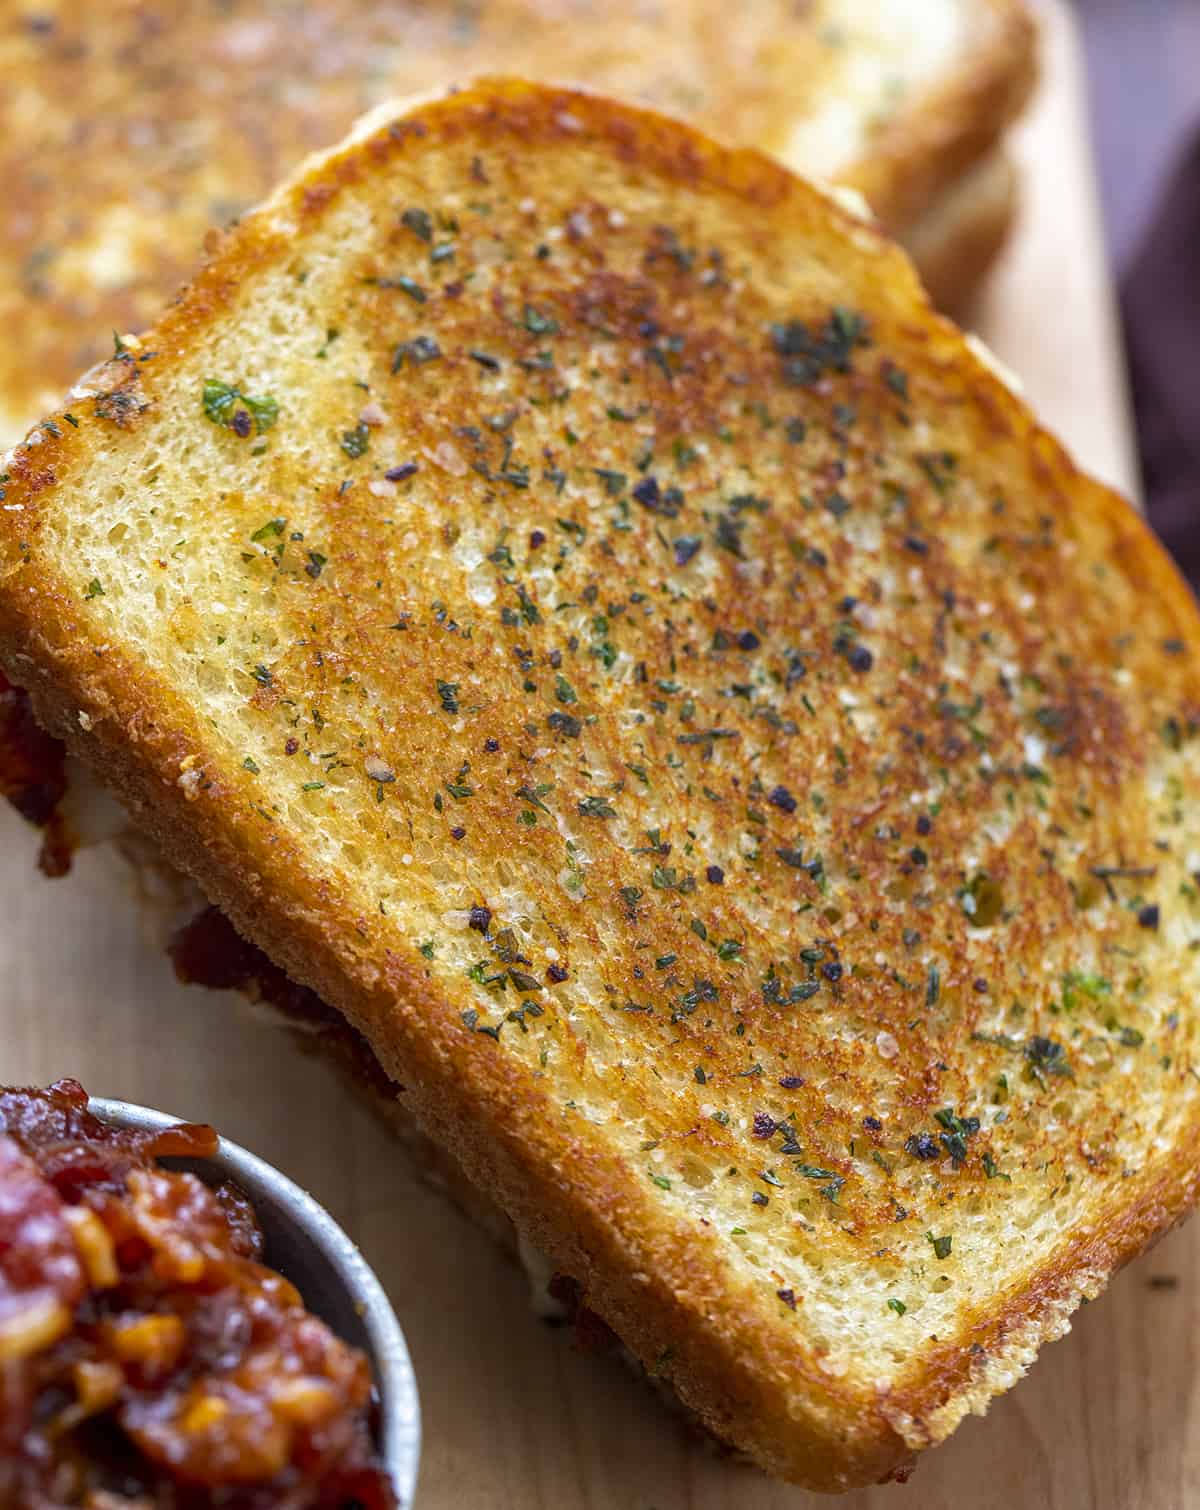 Close up of Grilled Cheese Sandwich. Appetizer, Dinner, Supper, Grilled Cheese, Sandwich, Cheese Sandwich, Super Bowl Food,Game Day Food, Best Sandwich Ever, i ma homesteader, iamhomesteader